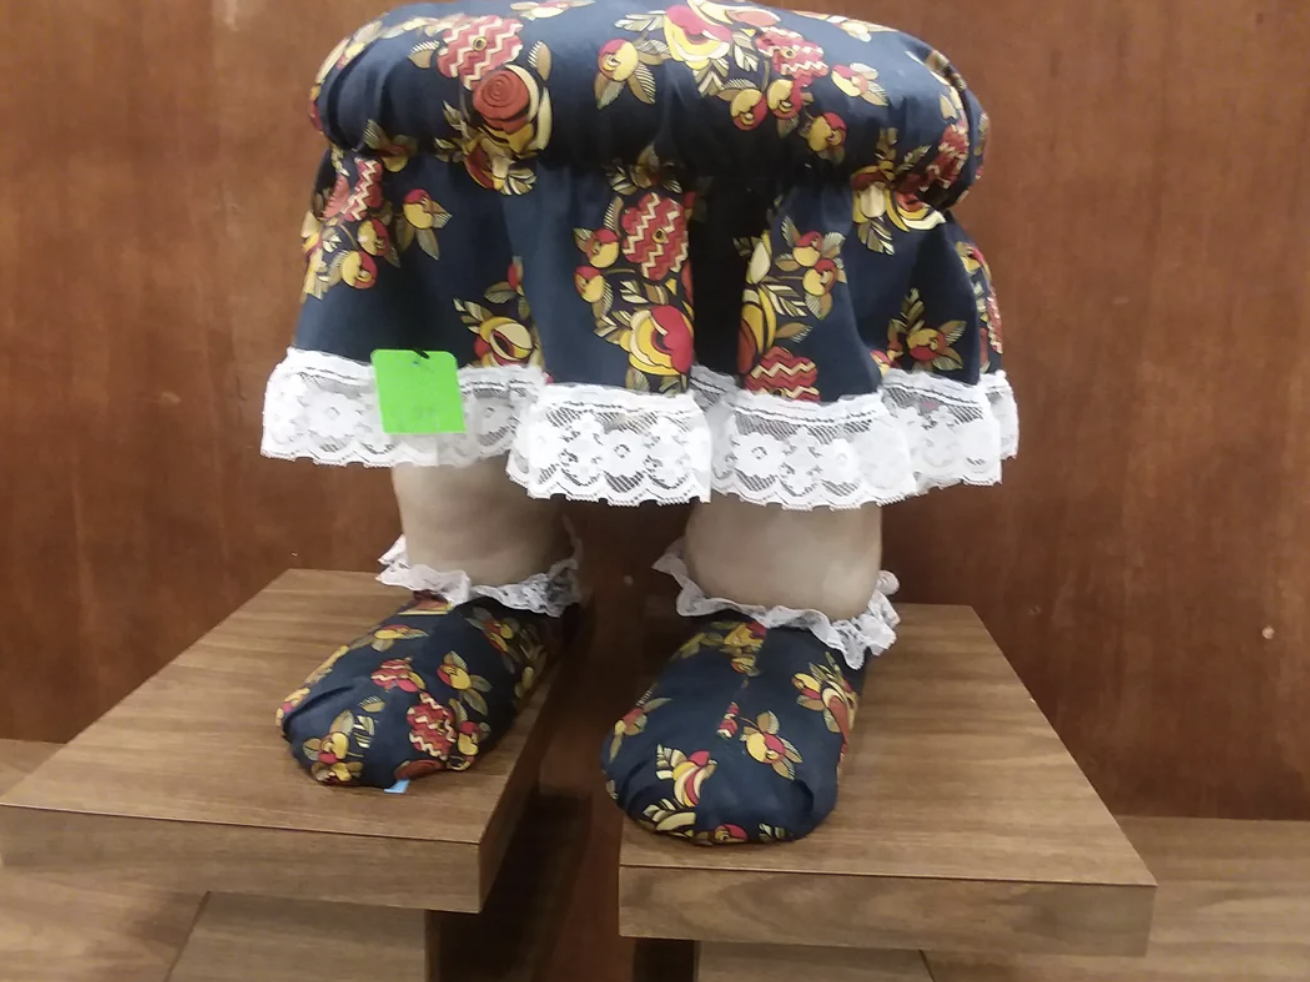 A footstool with a person&#x27;s legs as feet and a skirt as a cover